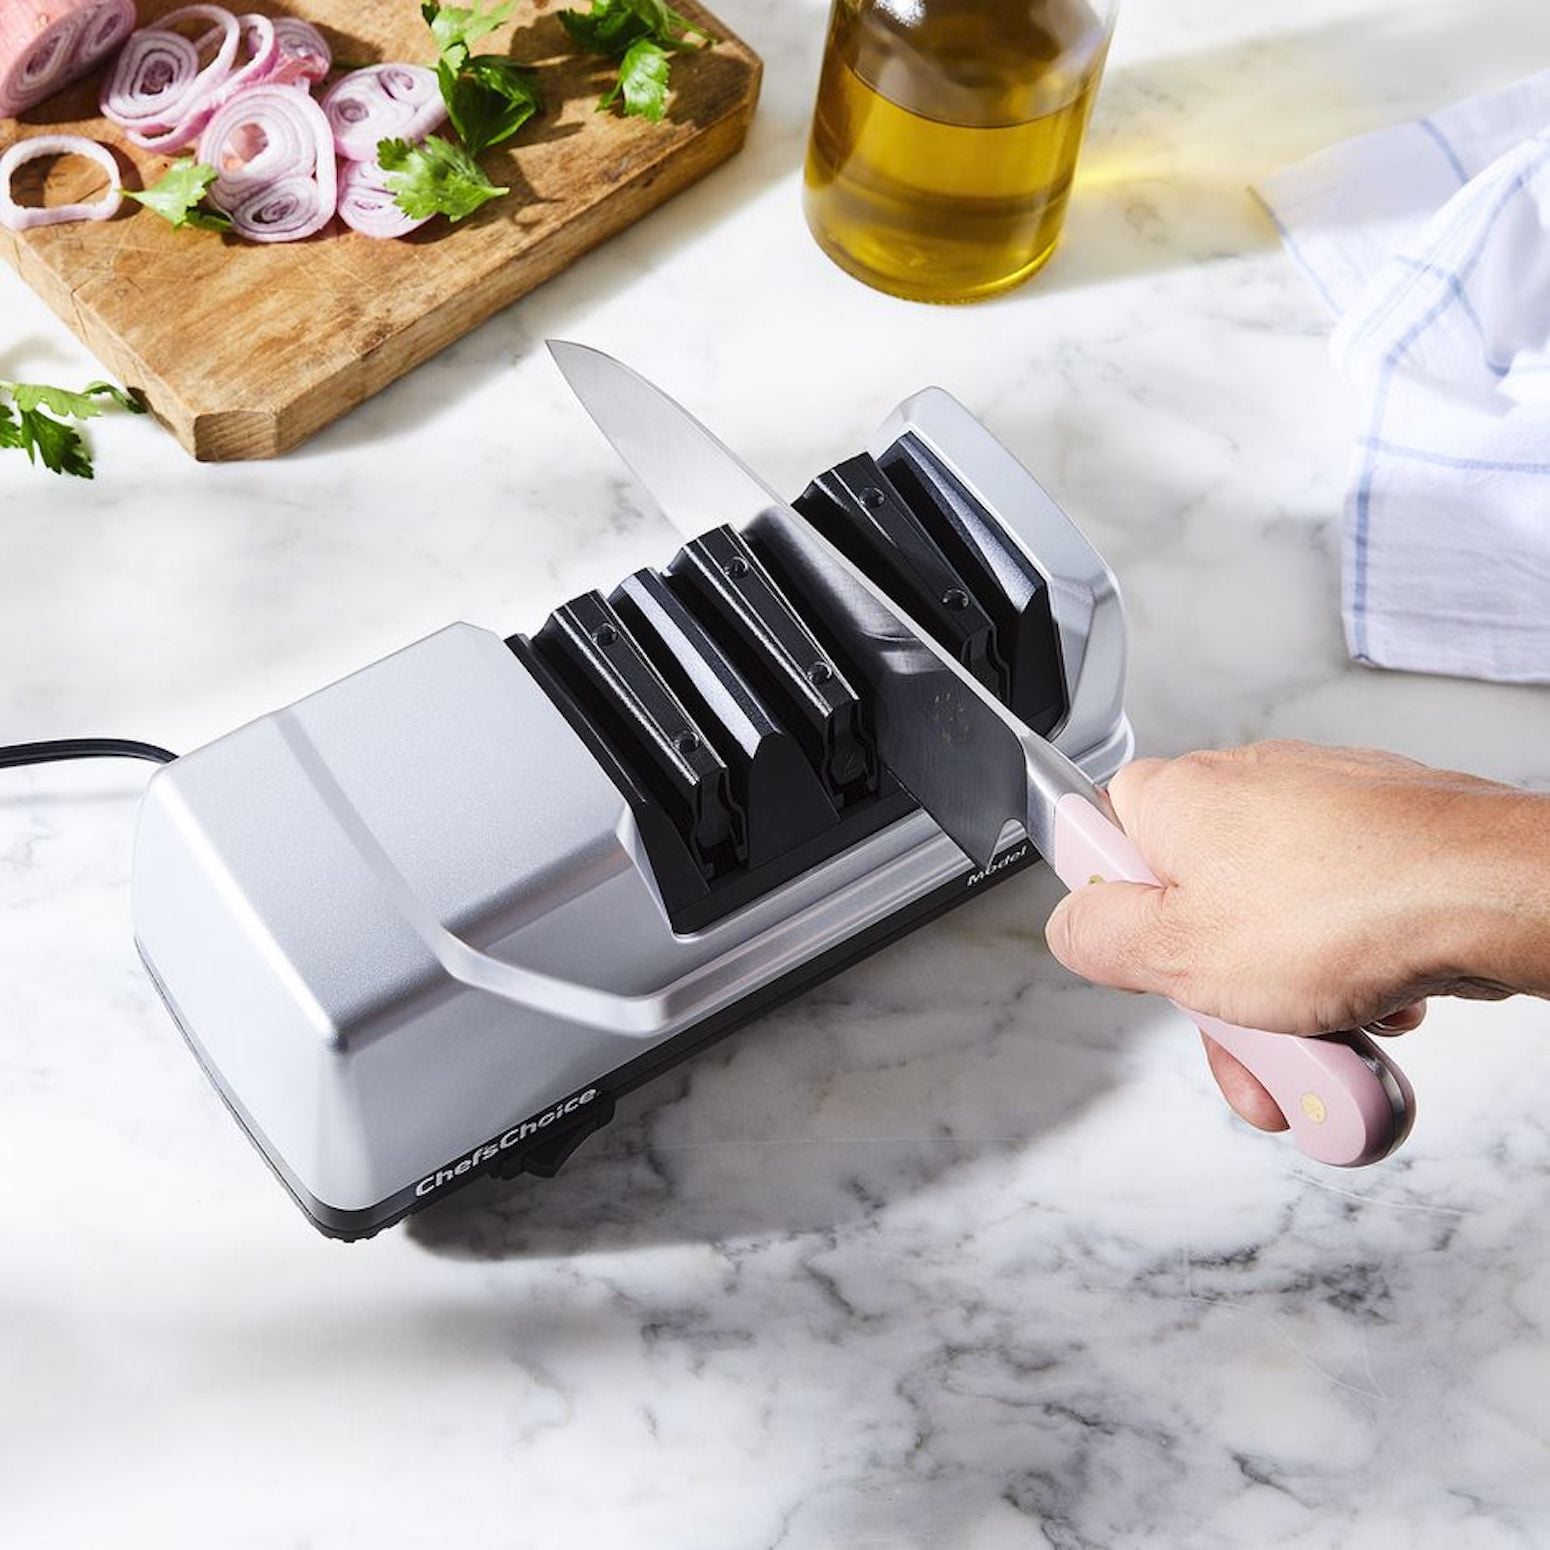 35 best kitchen gadgets from , according to reviewers